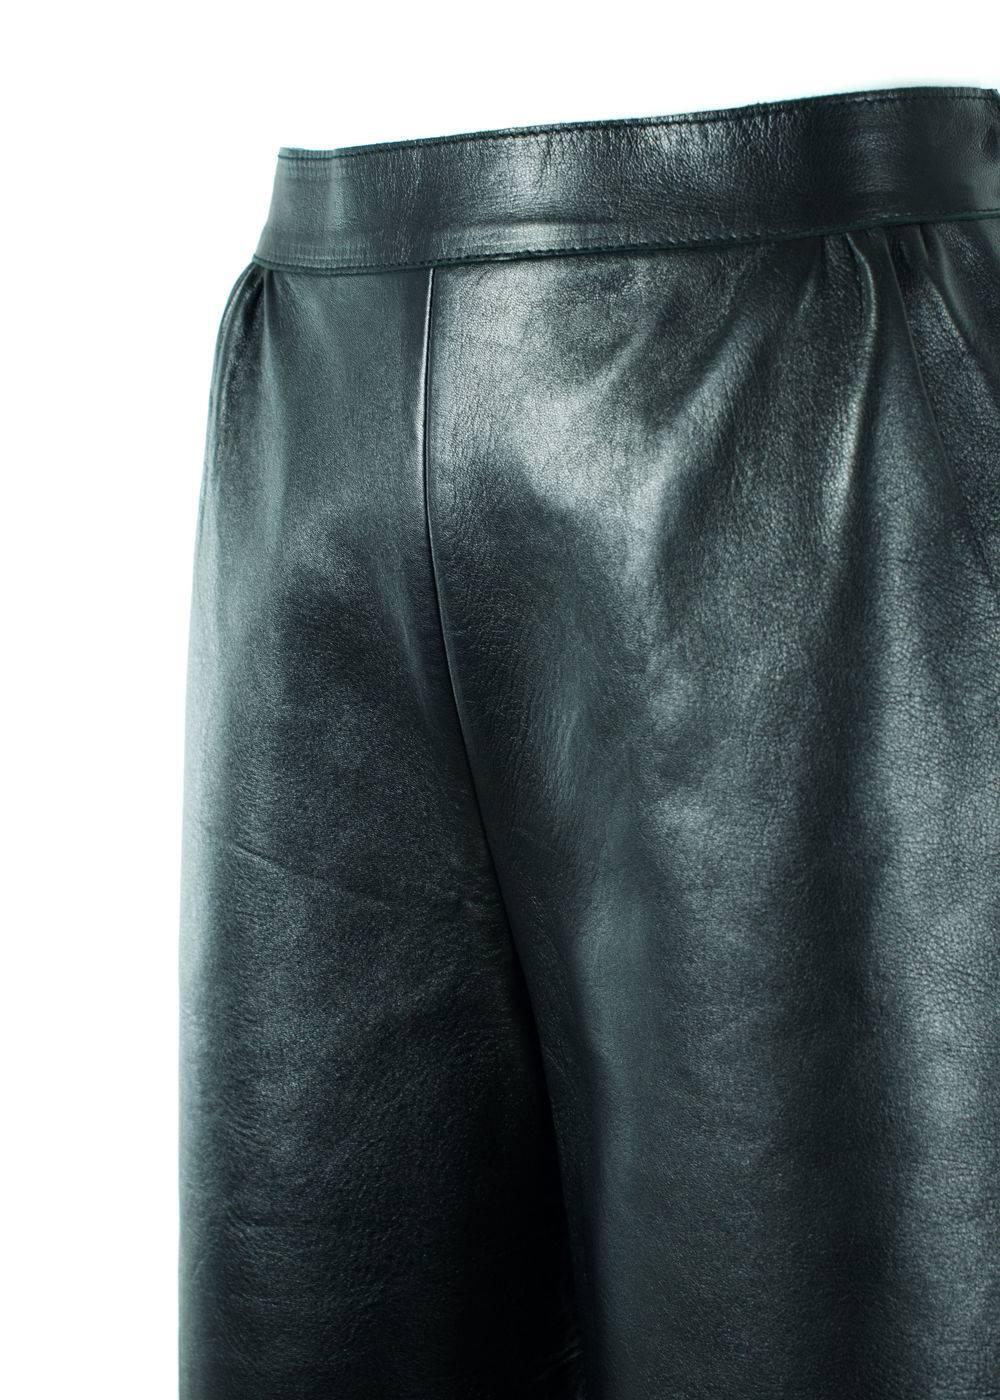 Brand New Valentino Culottes
Original Tag & Hanger Included
Retails in Stores & Online for $1800
Size IT 40 / US 4 Fits True to Size

Culottes have been a trending silhouette this year. With these Valentino leather culottes, you are bound to keep in